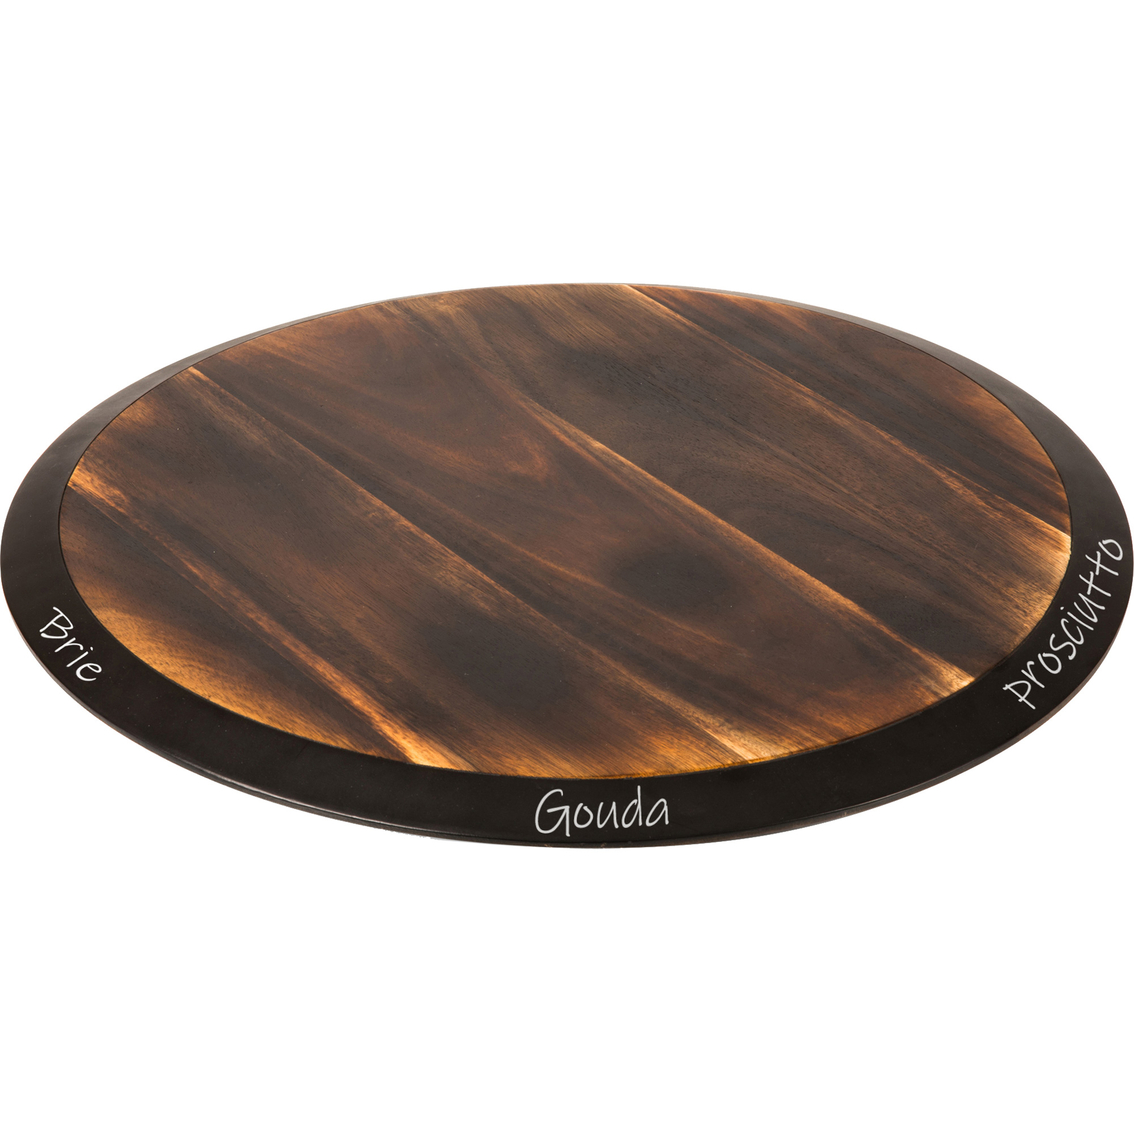 Picnic Time Toscana Lazy Susan Serving Tray - Image 3 of 7